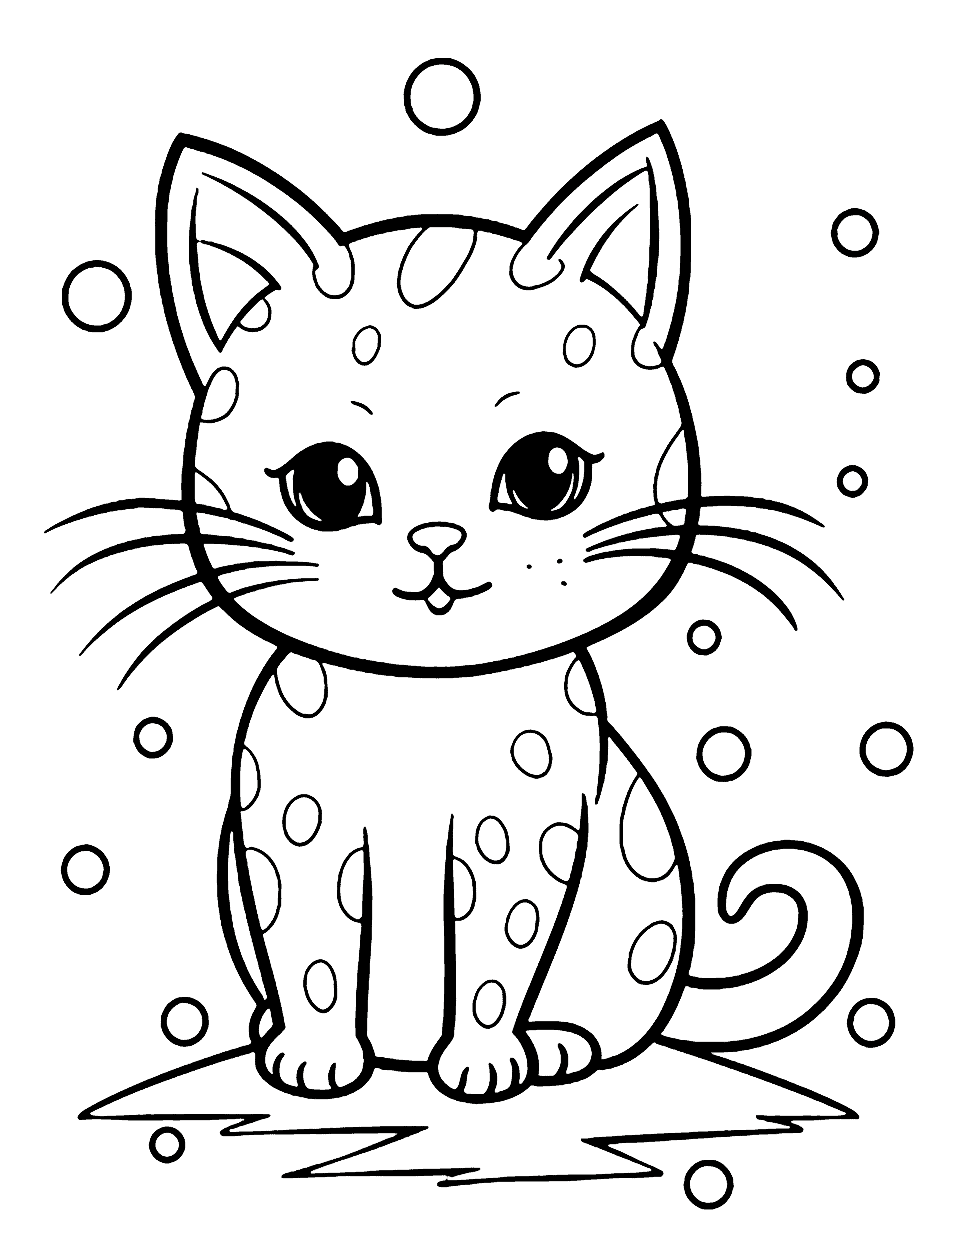 Cat in the Rain Coloring Page - A cat sitting in the rain, with detailed raindrops and puddles.